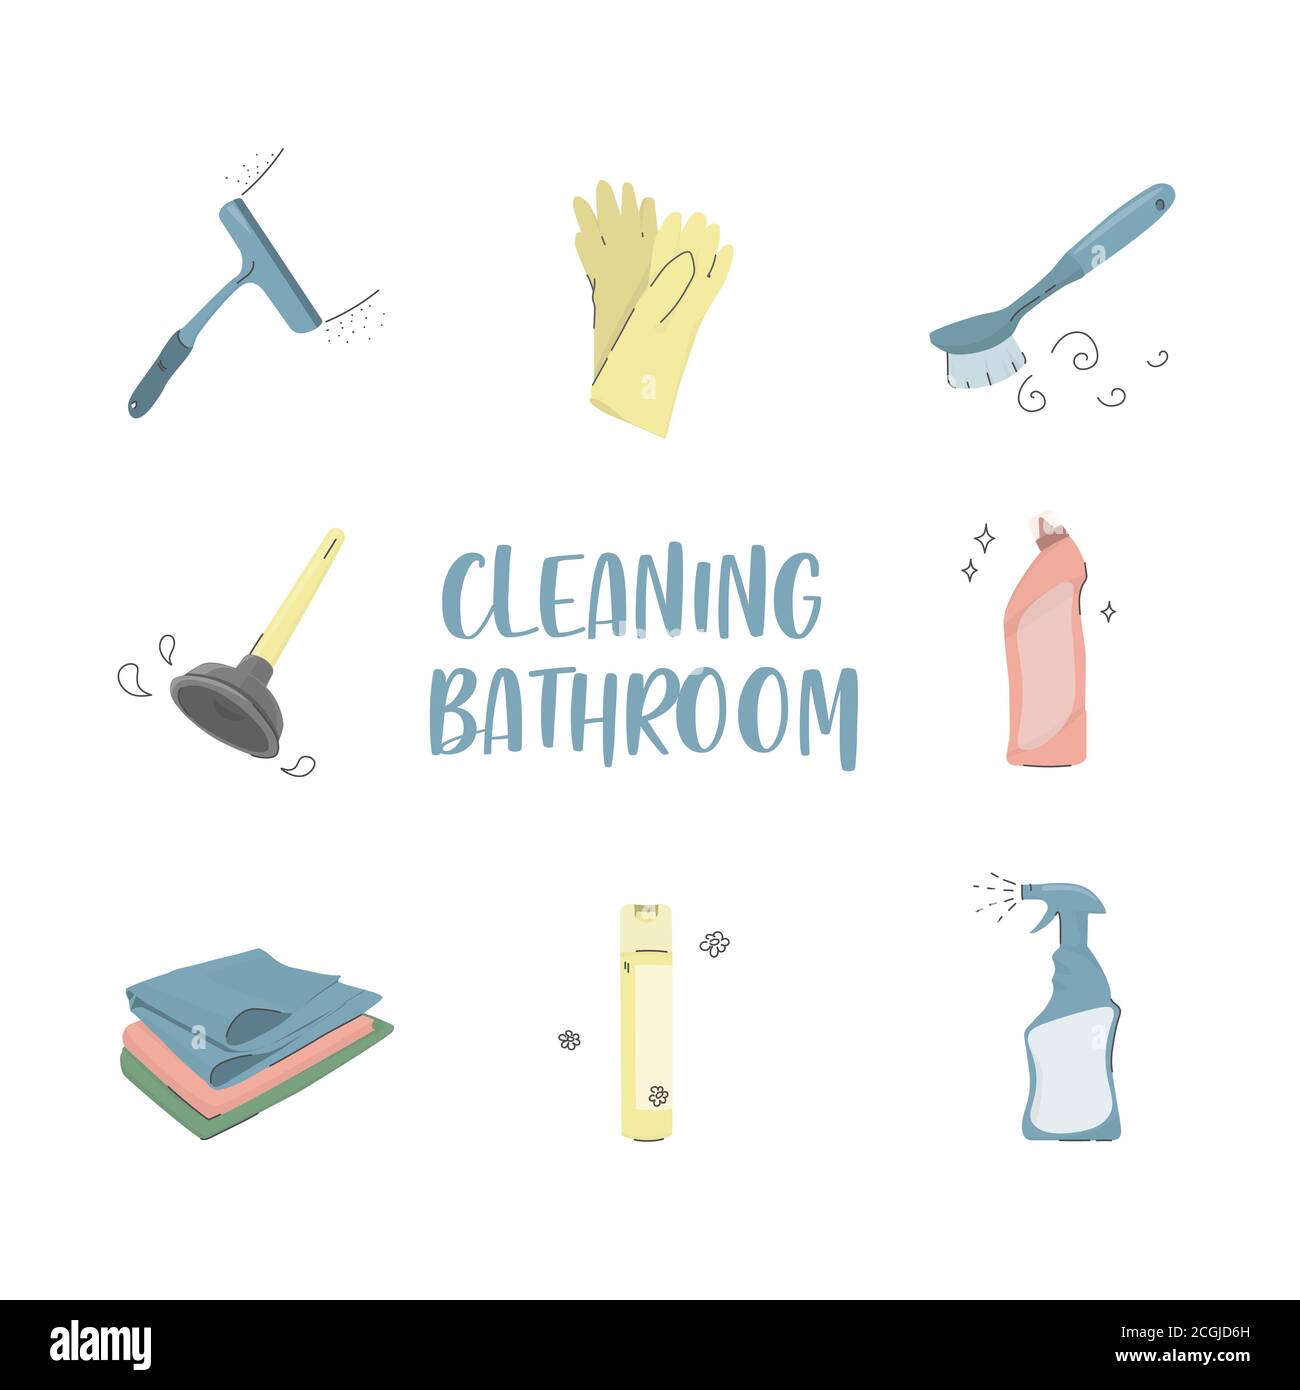 Bathroom cleaning. Set of vector color icons of cleaning tools